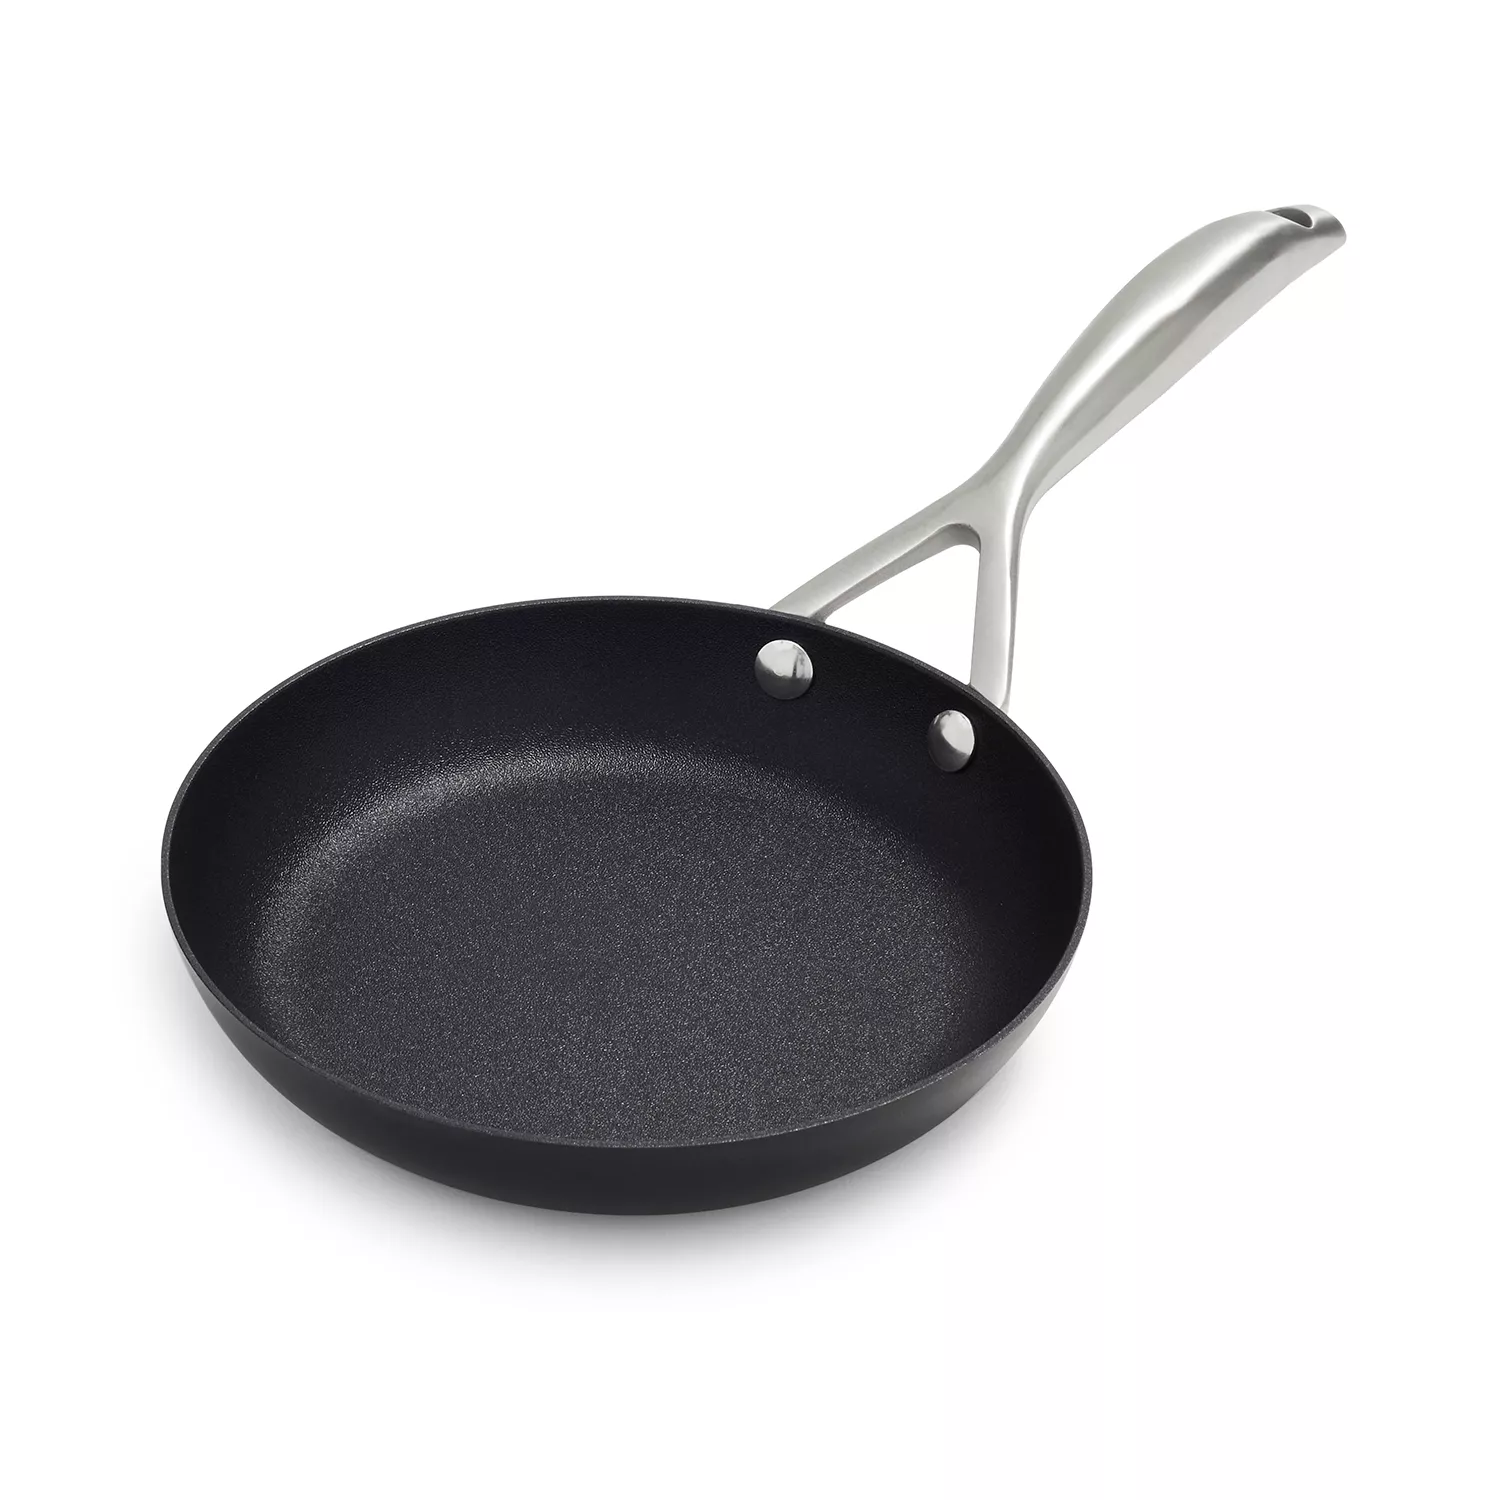 Scanpan Classic 4.25 Qt. Saute Pan with Lid- small dent - FREE